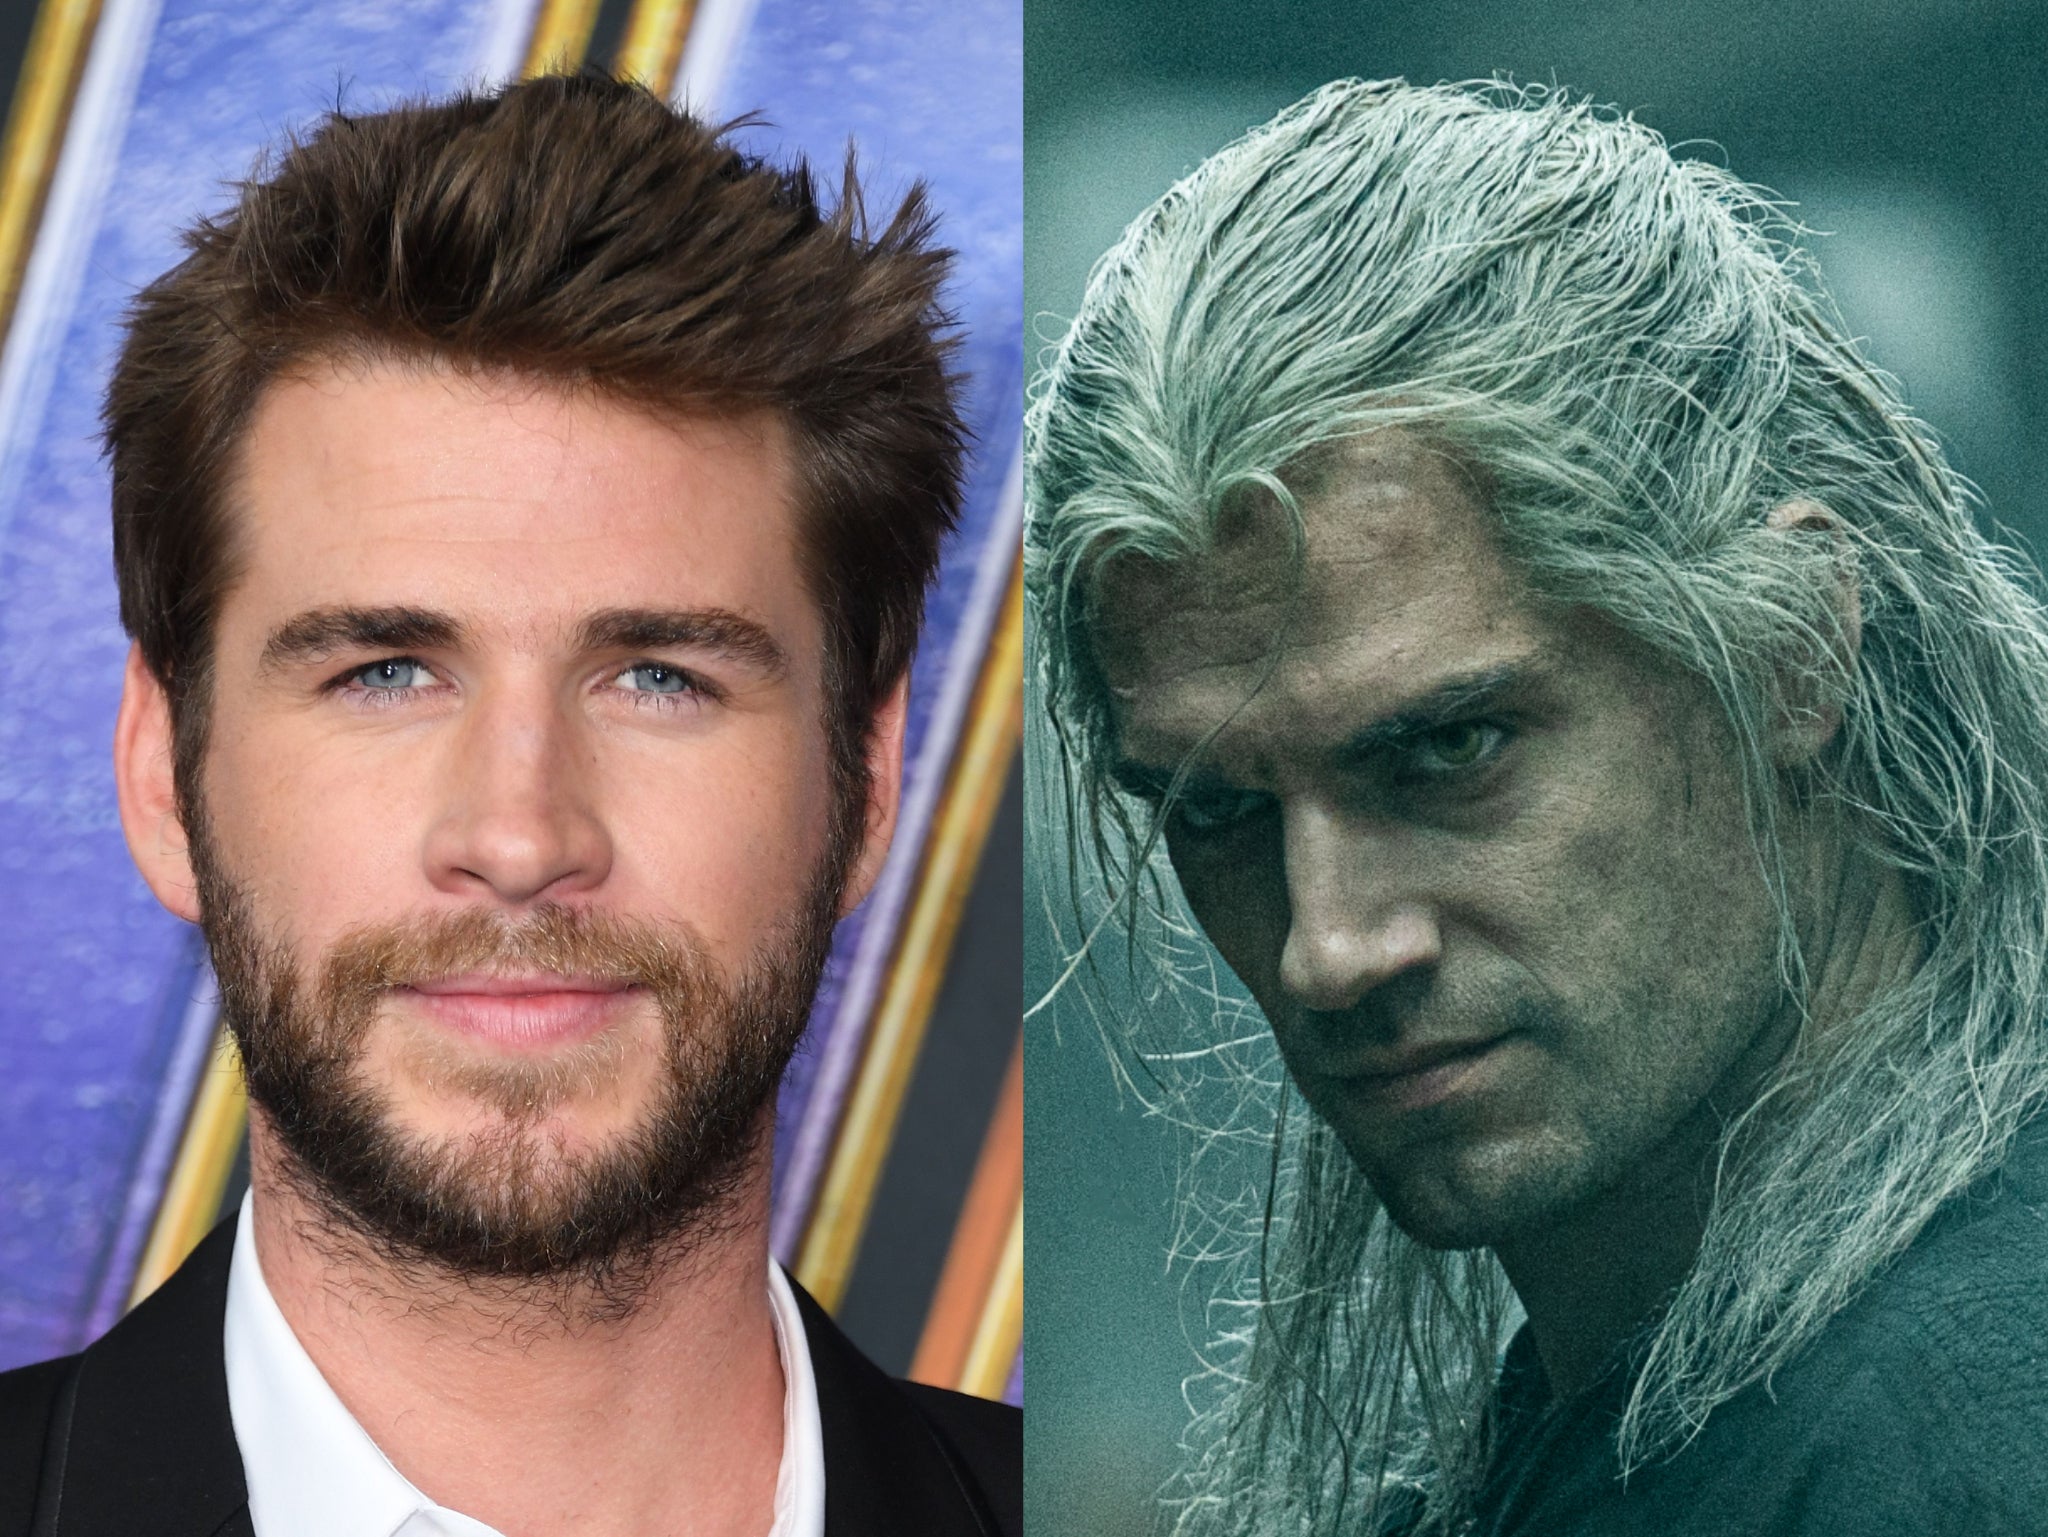 Henry Cavill to be replaced by Liam Hemsworth for season 4 of The Witcher